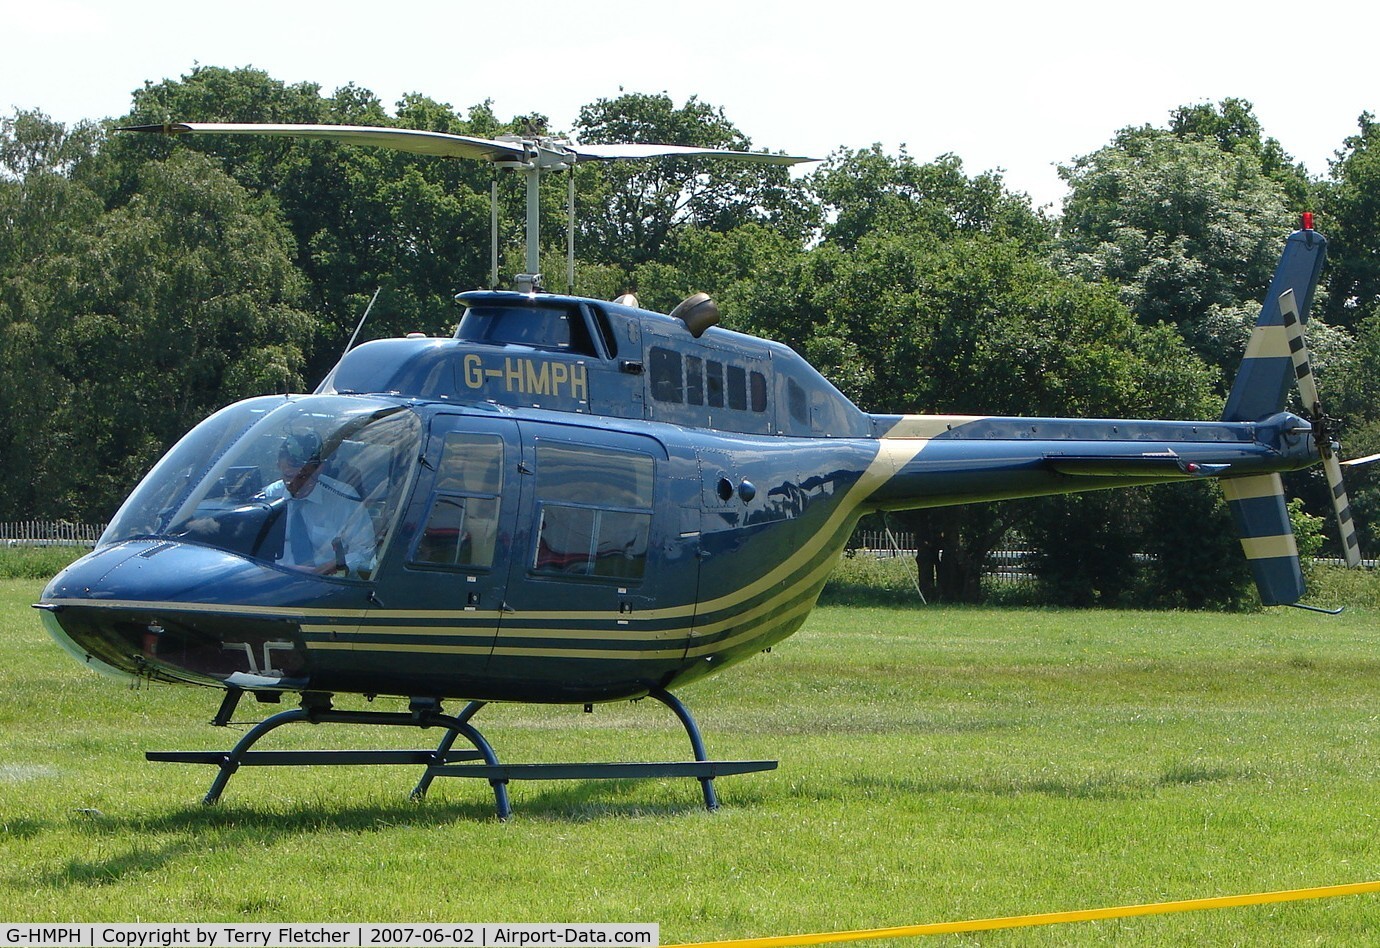 G-HMPH, 1973 Bell 206B JetRanger II C/N 1232, Helicopters arrive at the temporary Heliport on 2007 Epsom Derby Day (Horse racing)